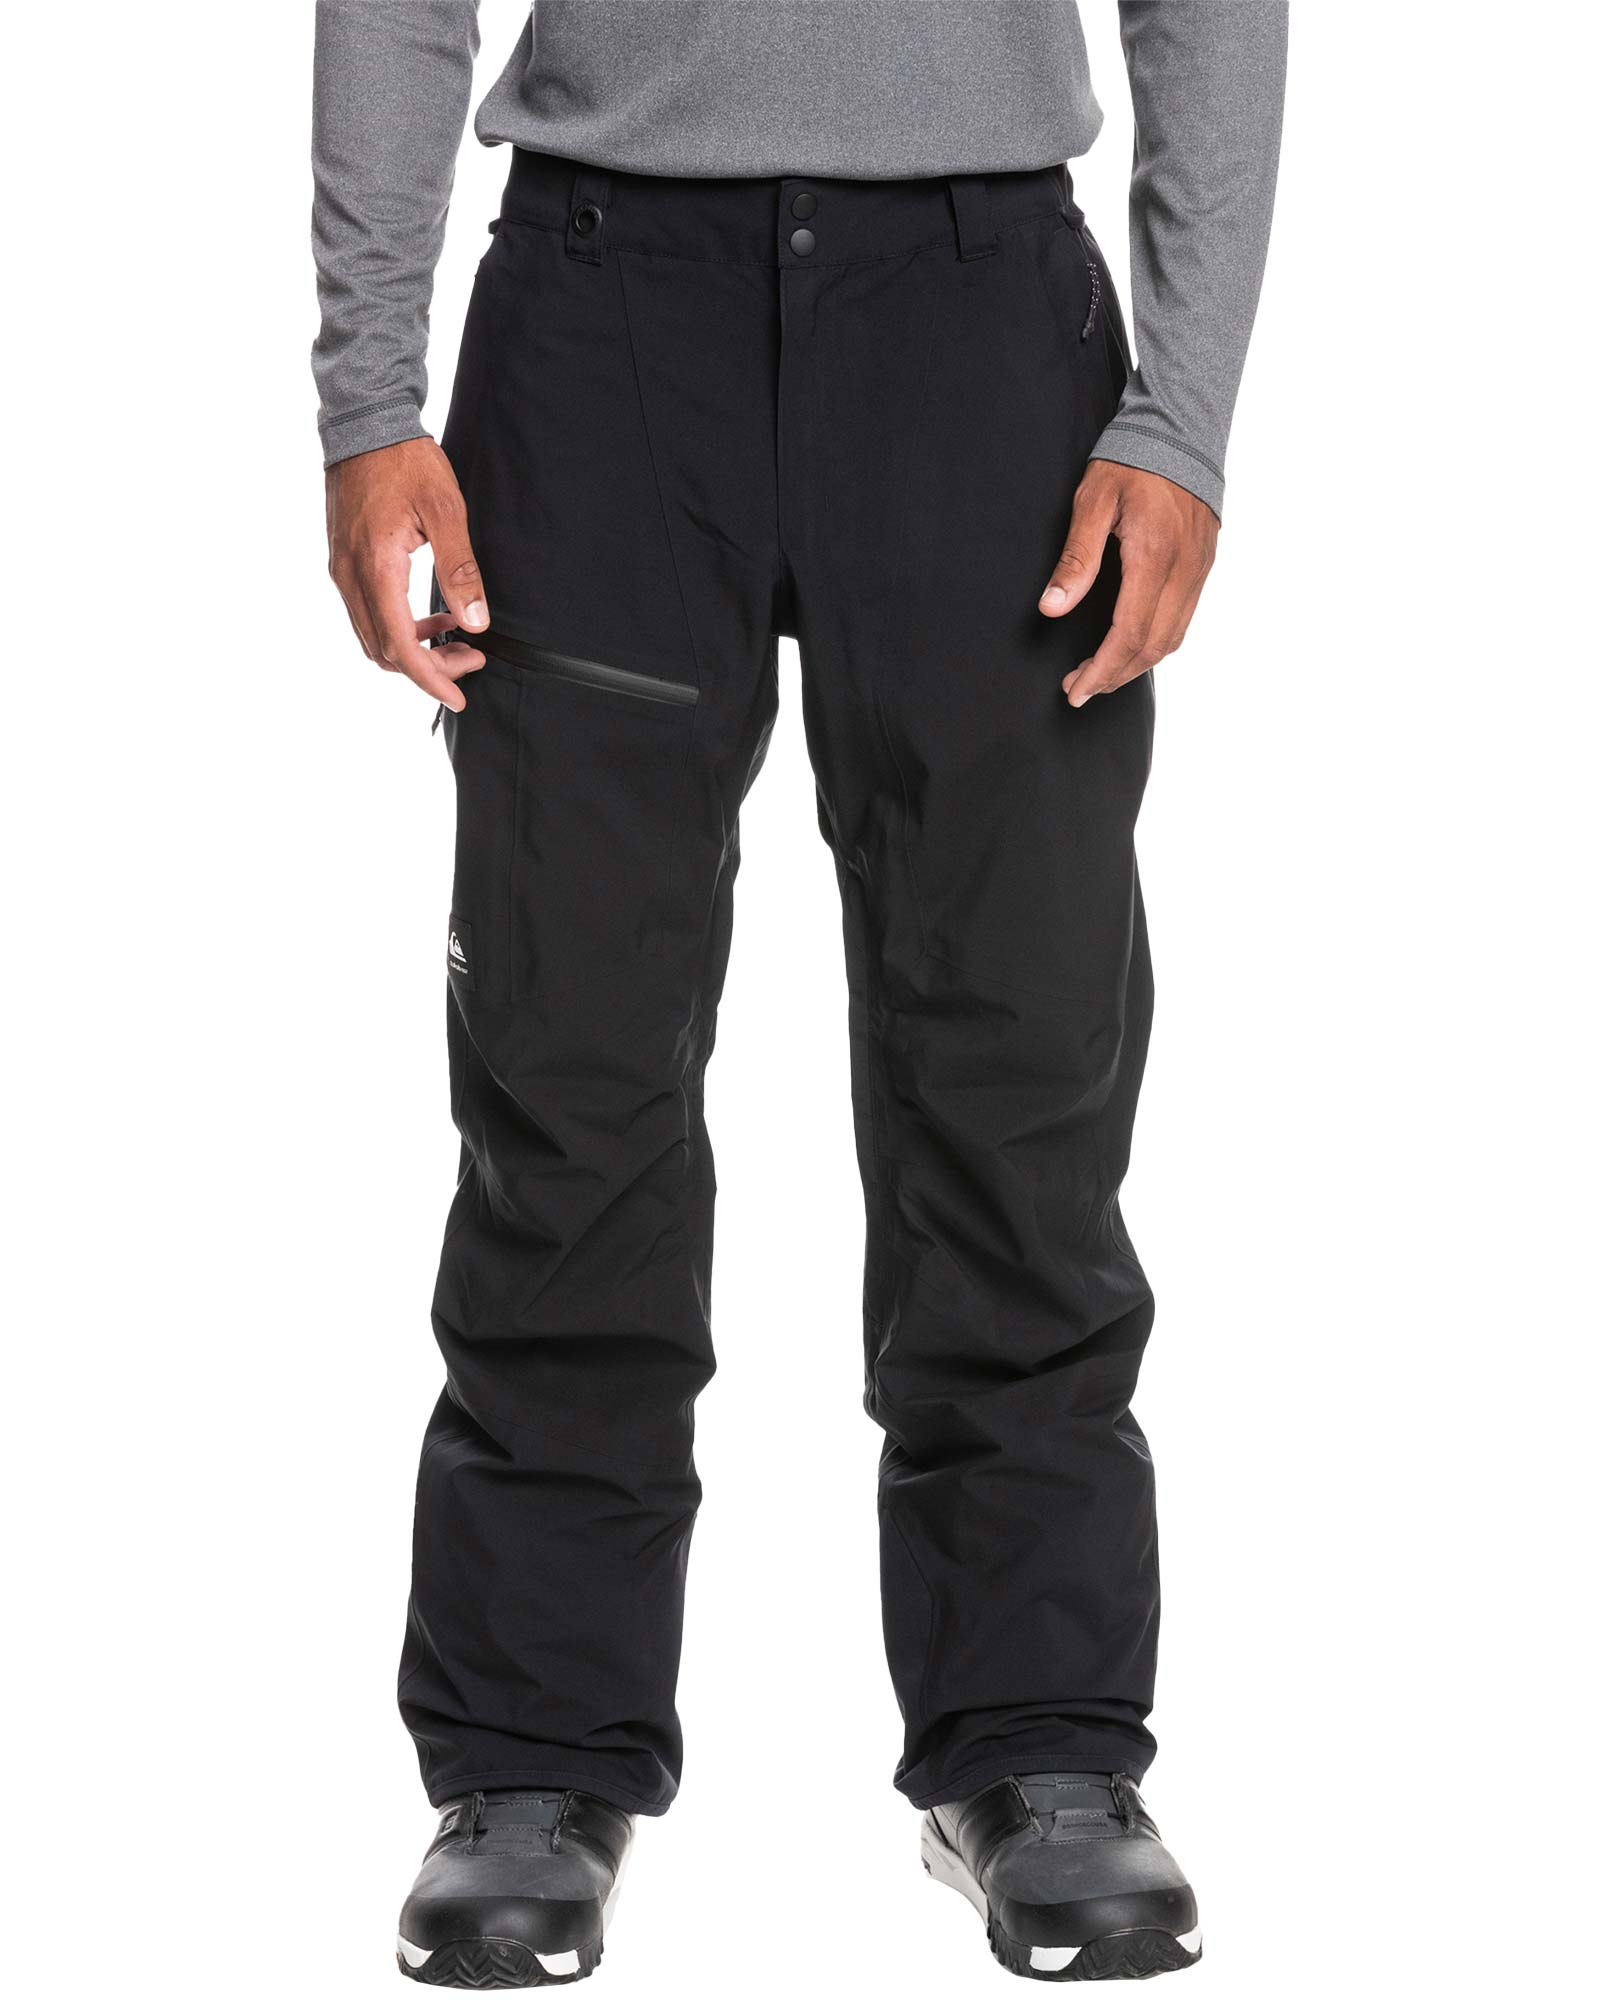 Quiksilver Forever Stretch GORE-TEX Insulated Men's Pants 0